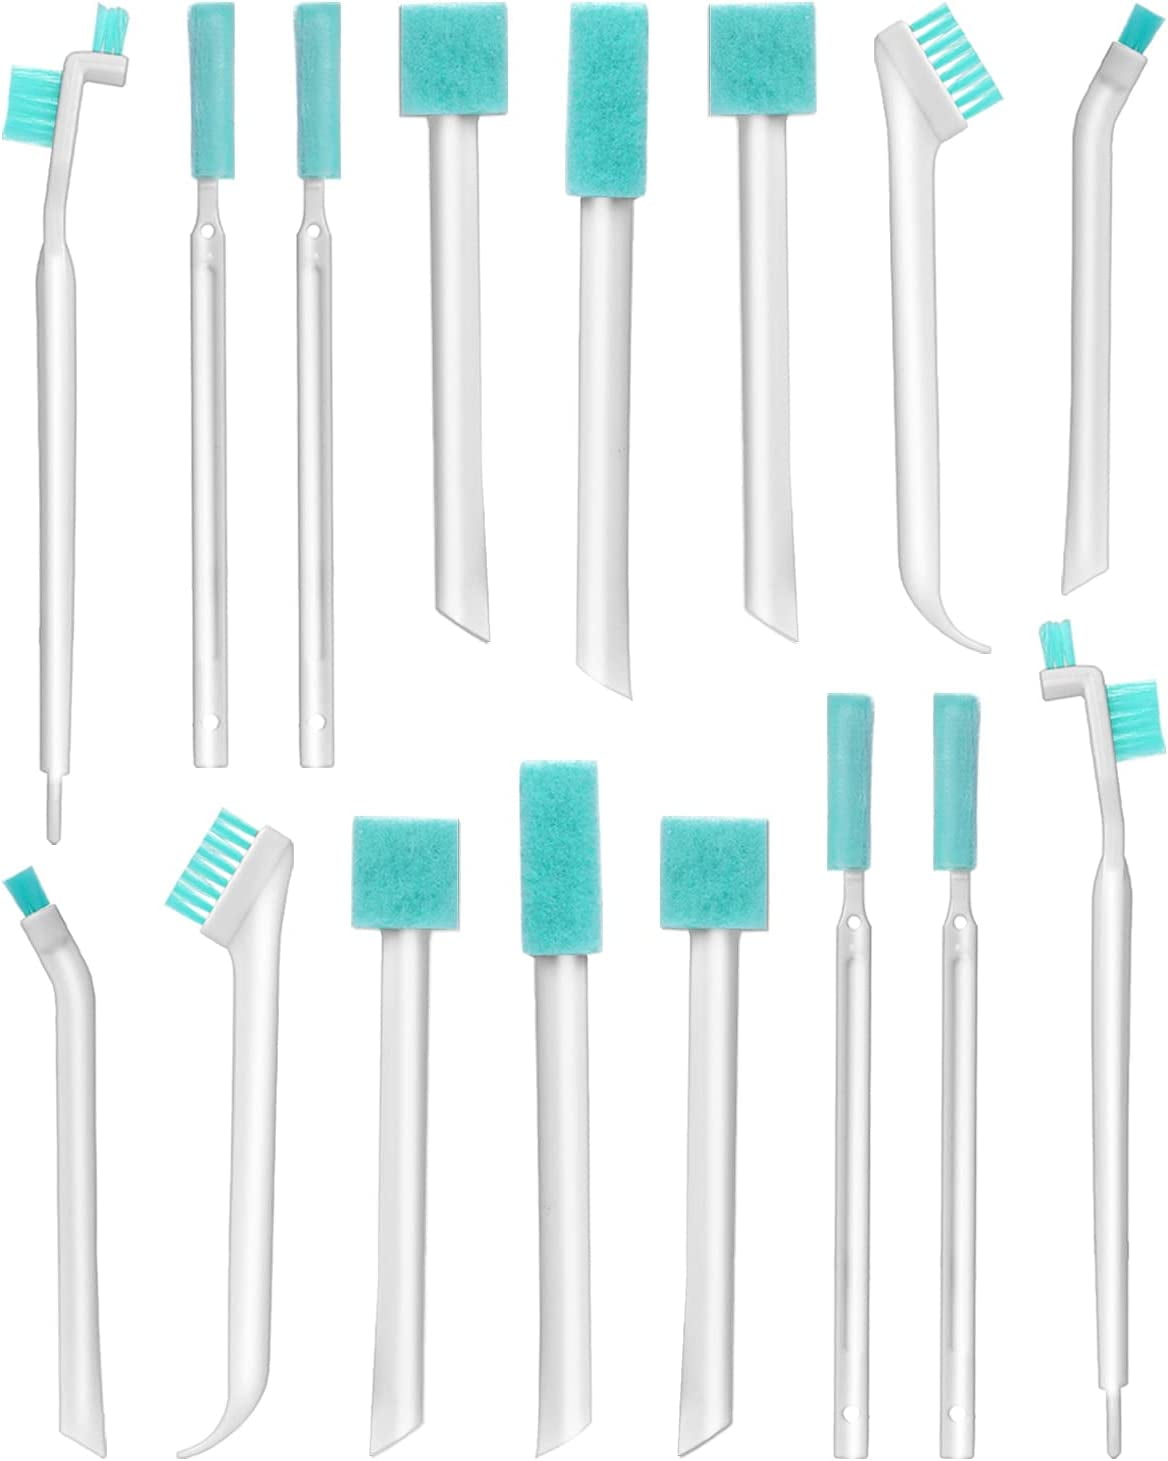 16 Pcs Small Cleaning Brushes, Happon Deep Detail Cleaning Tools